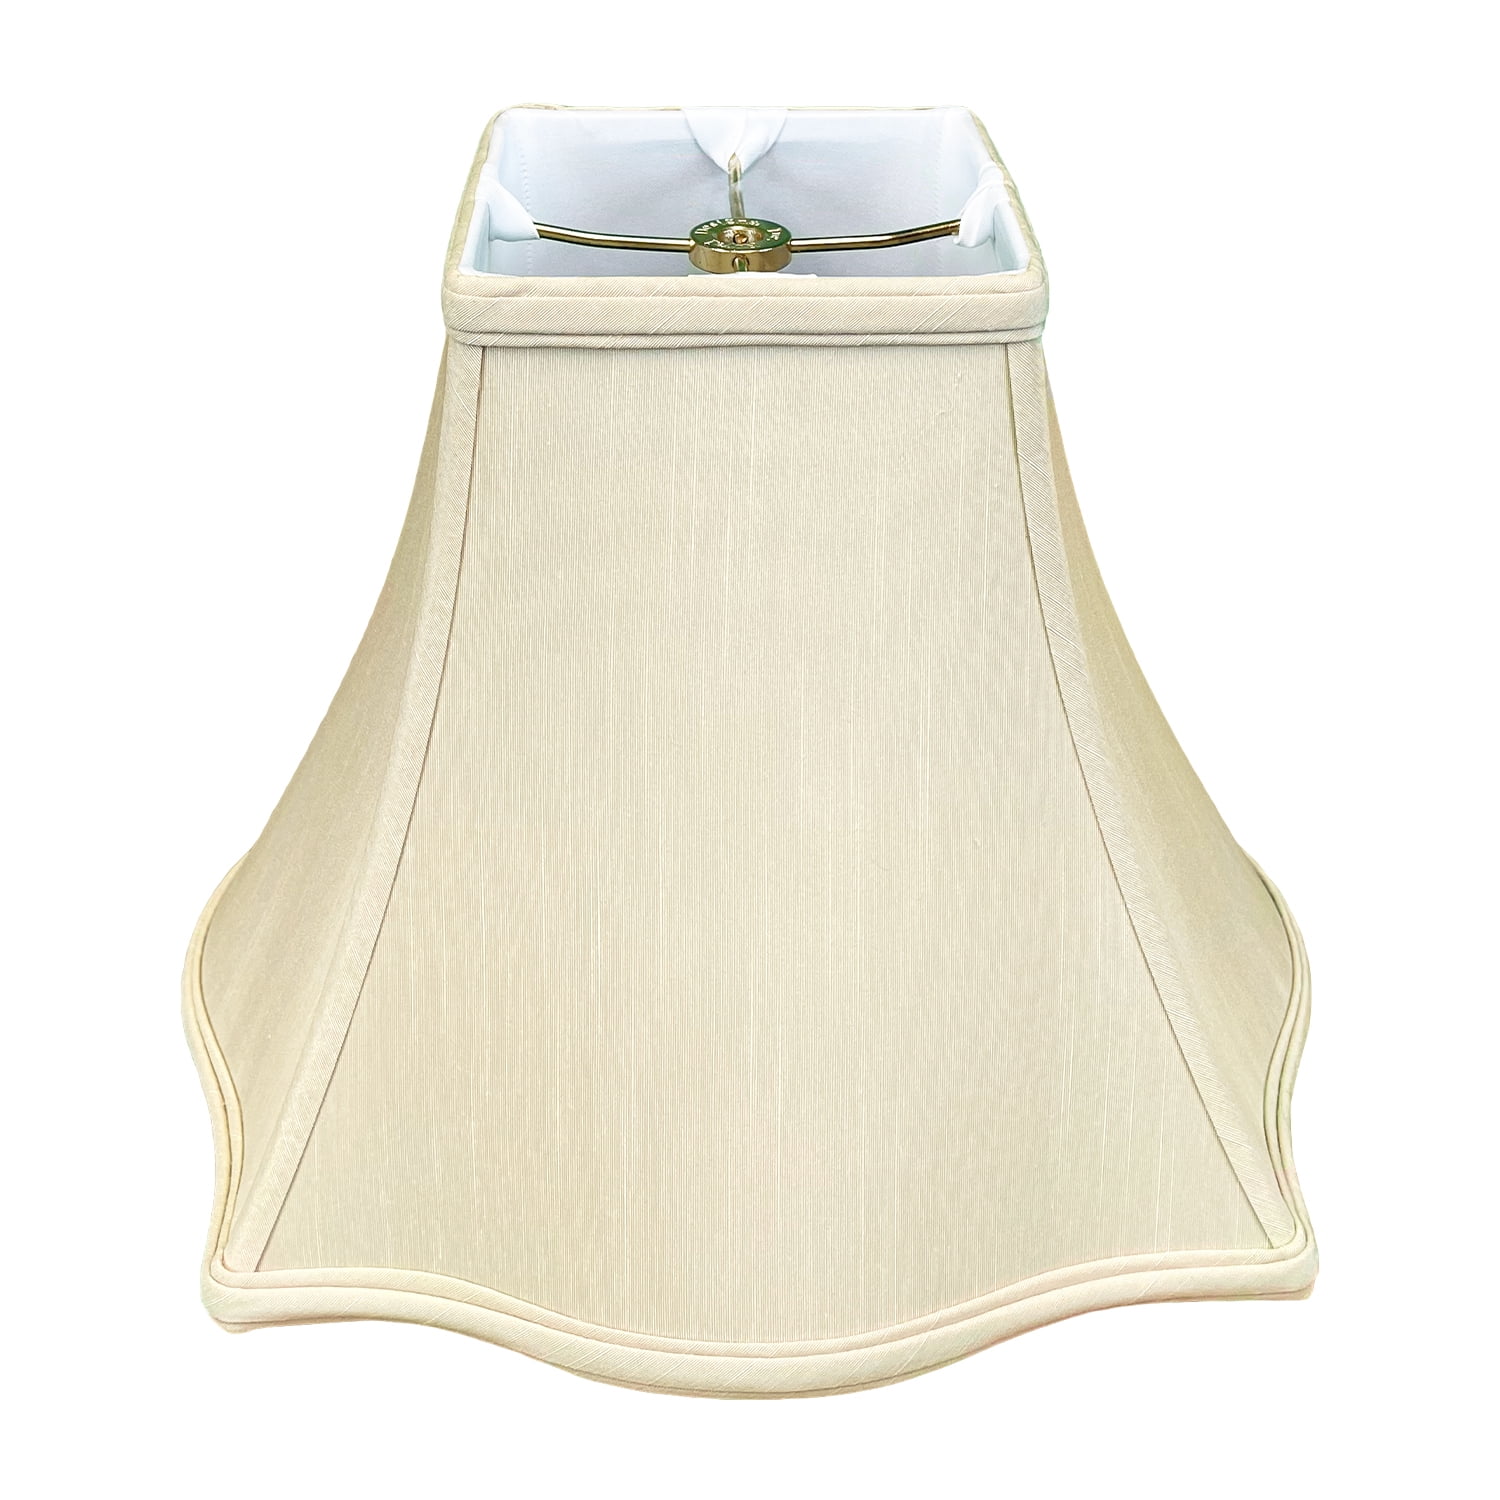 18 x 14 x 12.5 Inc 9 x 7 Royal Designs Scalloped Oval Bell Designer Lamp Shade White, DS-91-18WH x